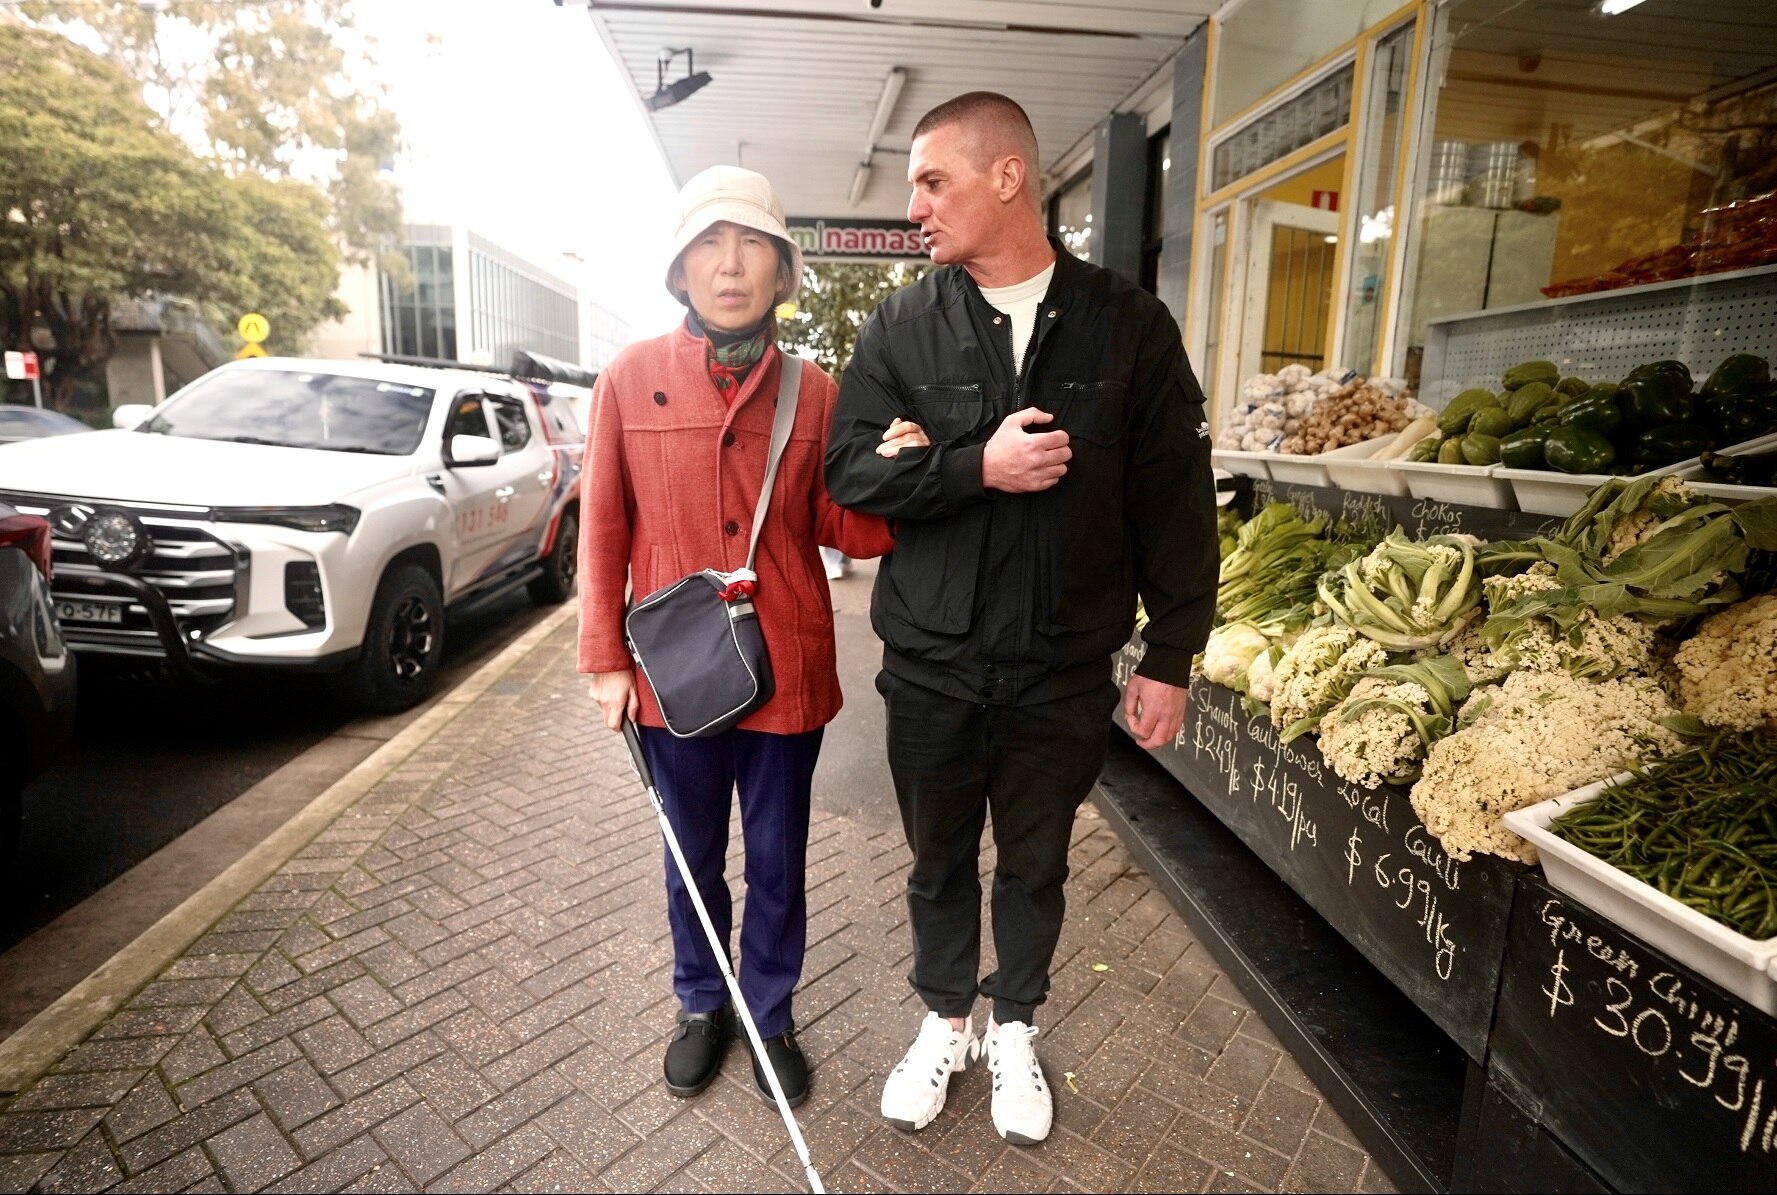 An elderly Asian woman, holding a white cane, and standing next to a larger, middle-aged Caucasian male.